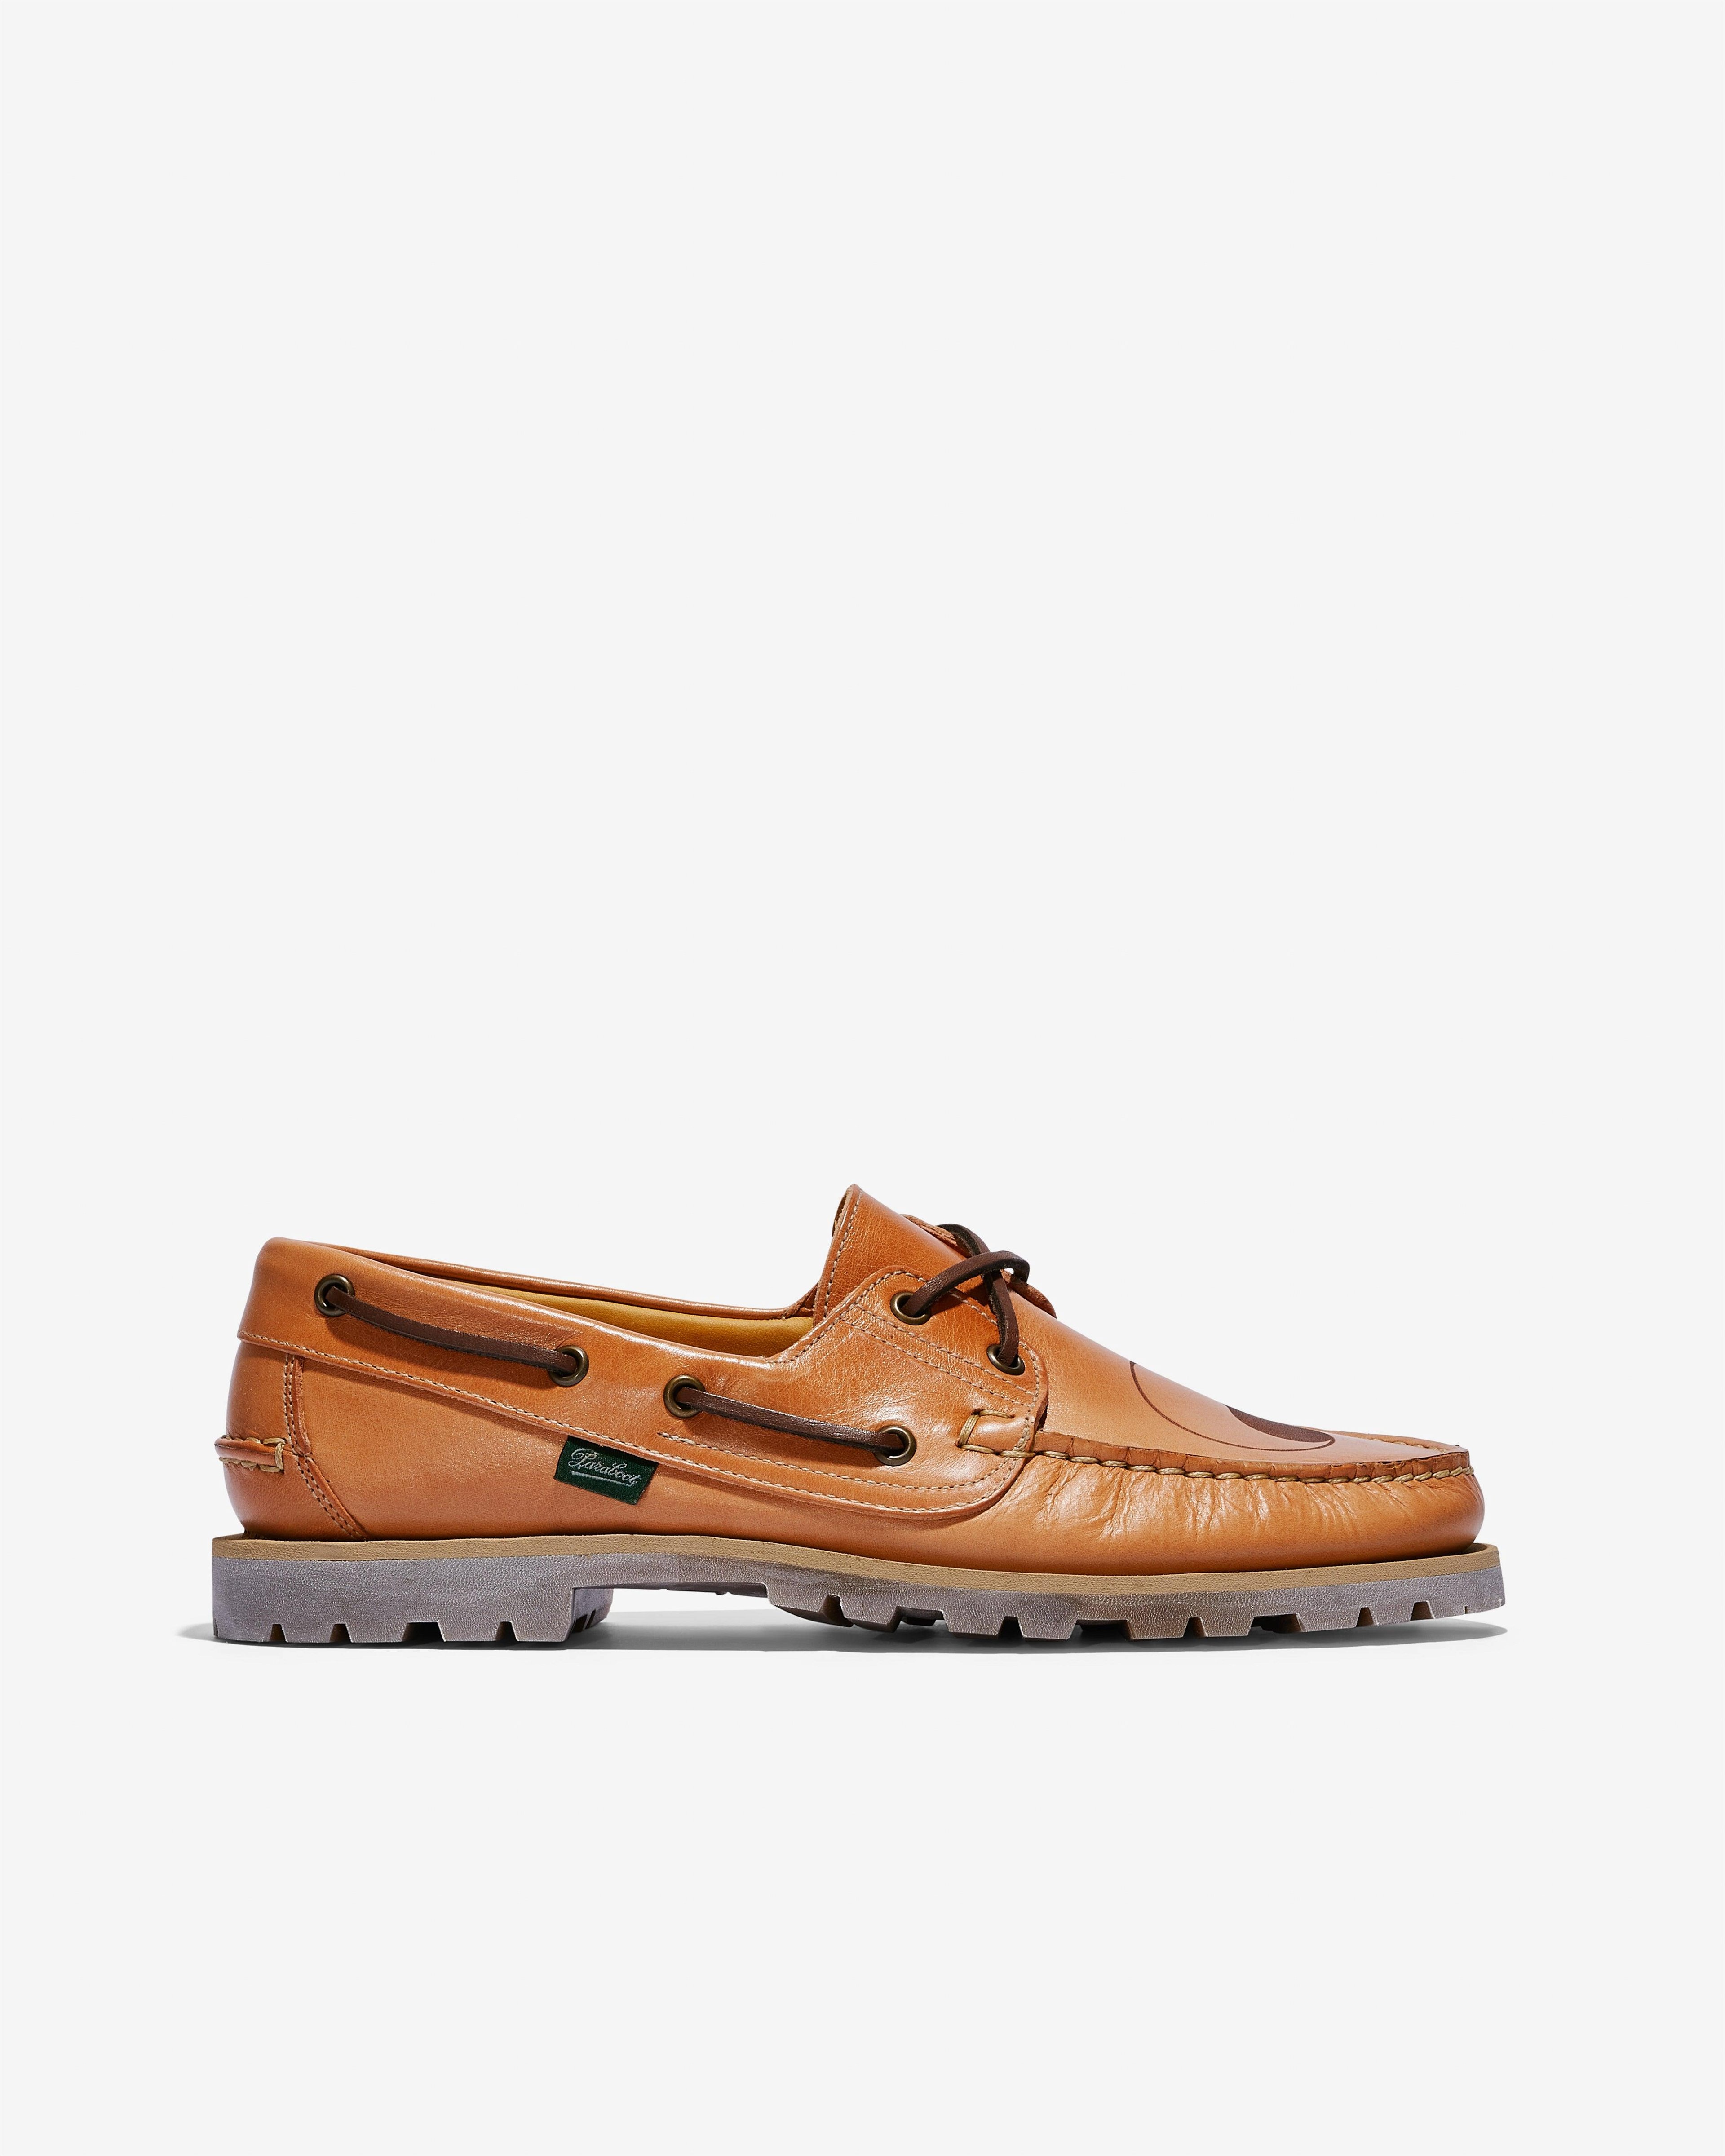 Our Legacy - Men's Paraboot Malo Boat Shoe - (Natural) by OUR LEGACY